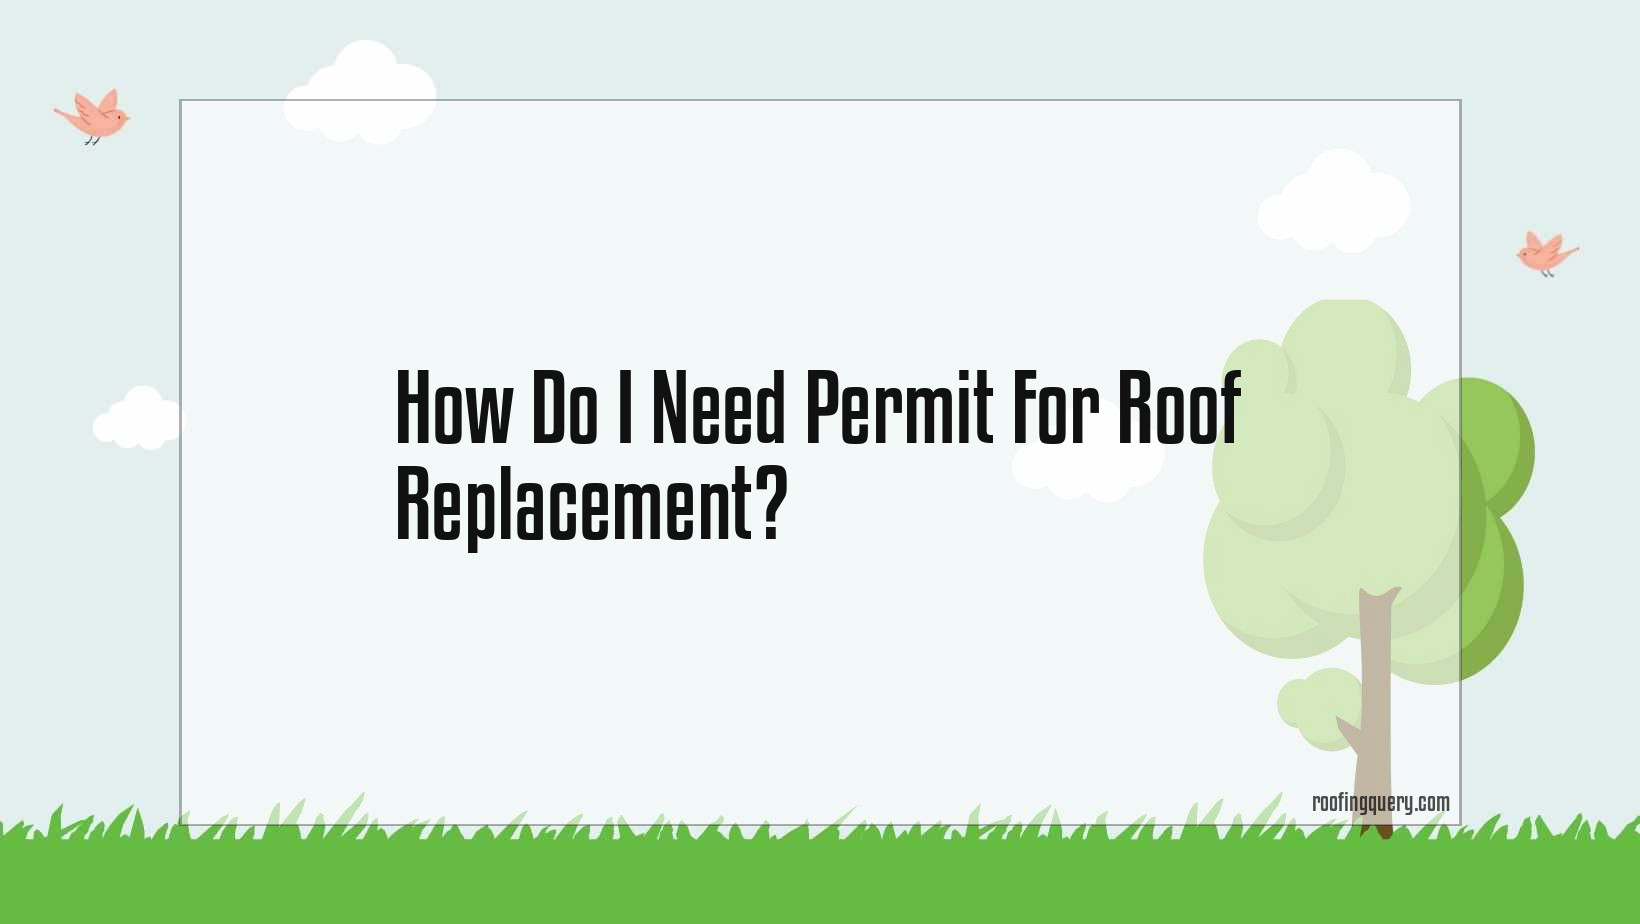 How Do I Need Permit For Roof Replacement?